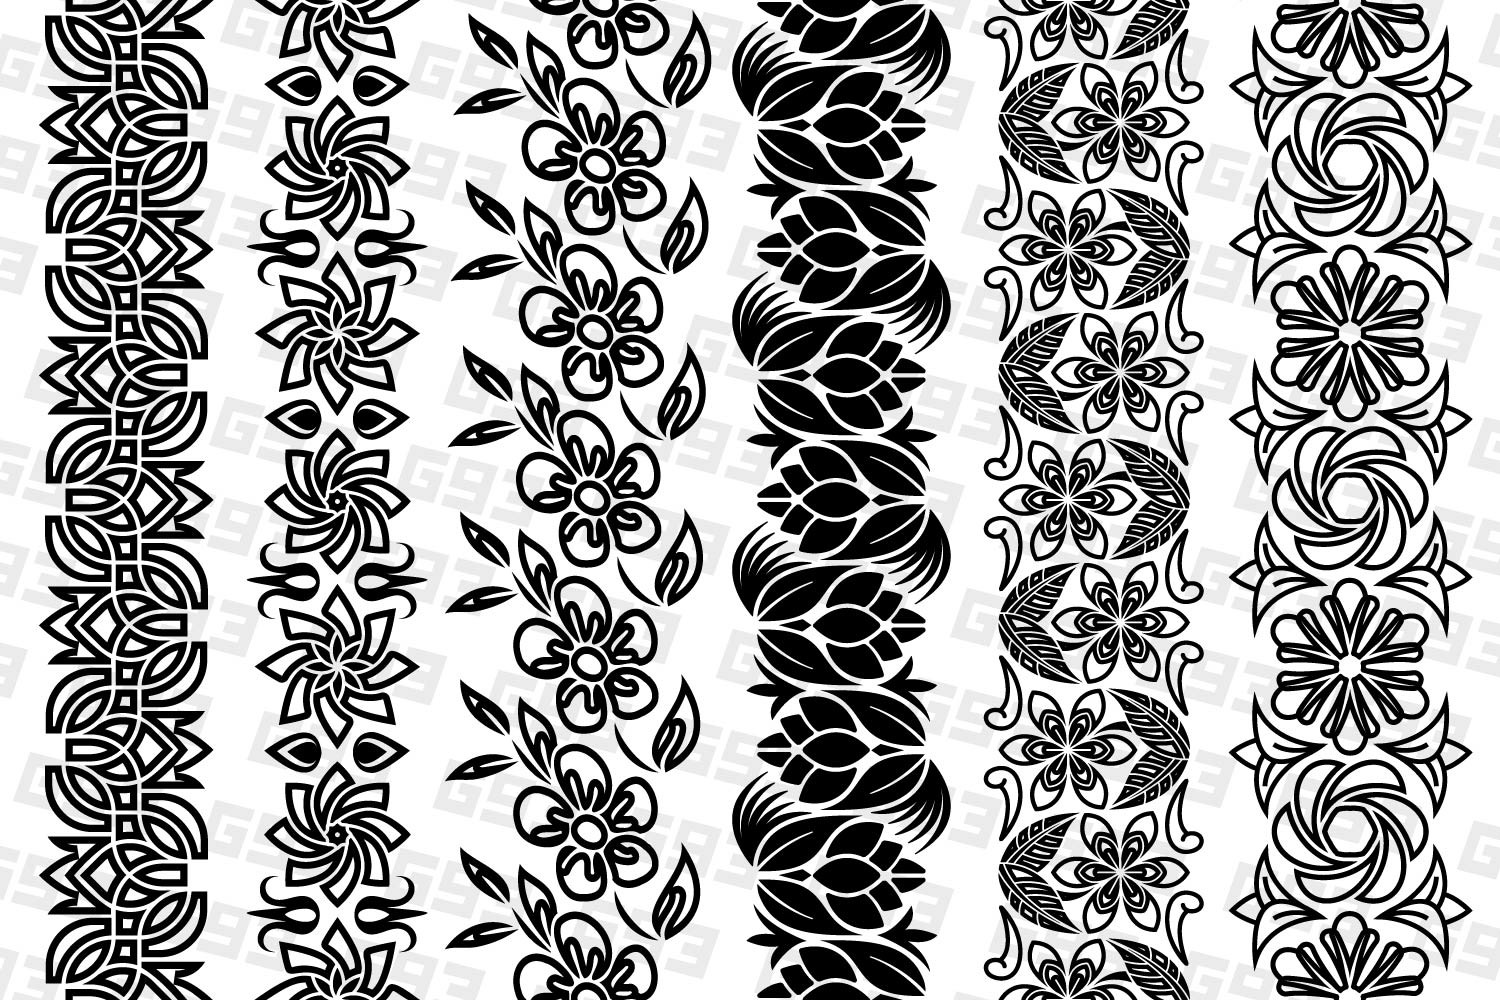 Floral Borders Graphic by G93 · Creative Fabrica